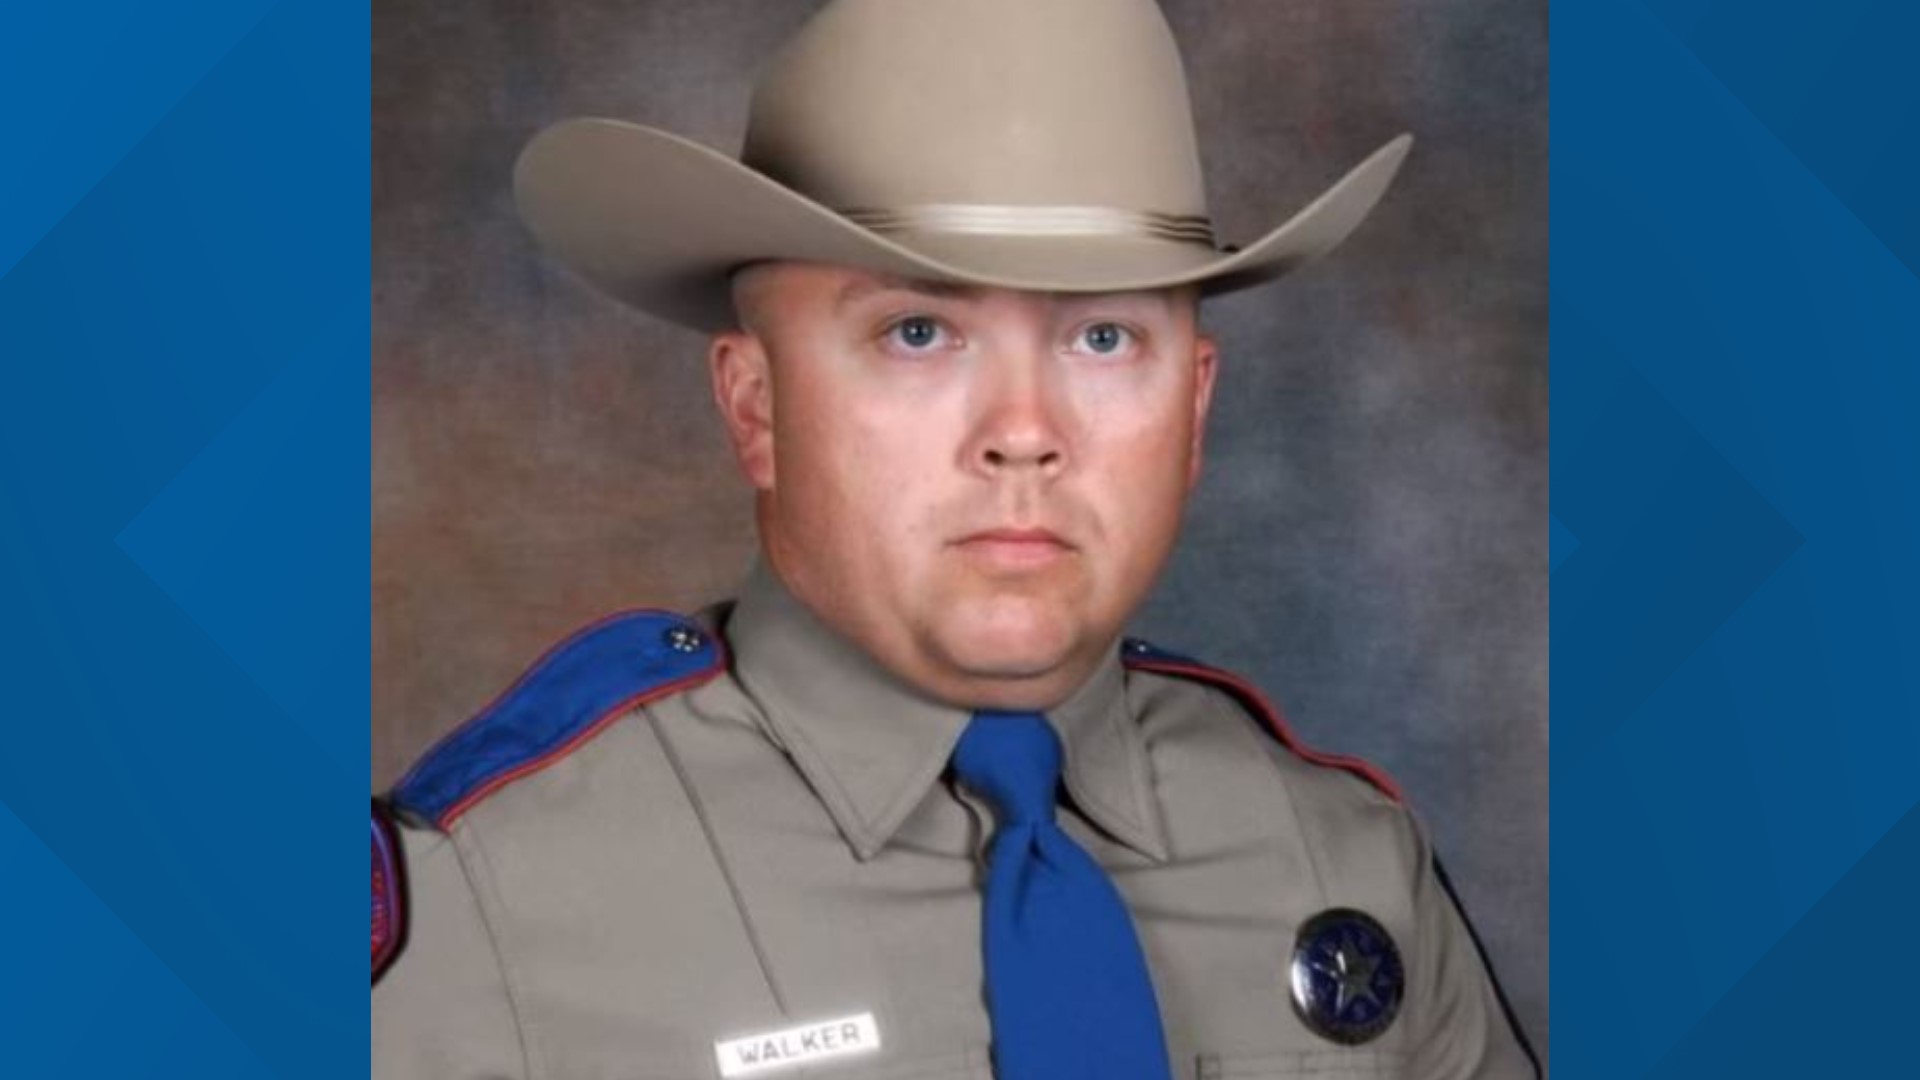 Trooper Chad Walker was shot in the head and abdomen by a man as he reportedly pulled in behind a disabled vehicle on the side of the road in Limestone County.